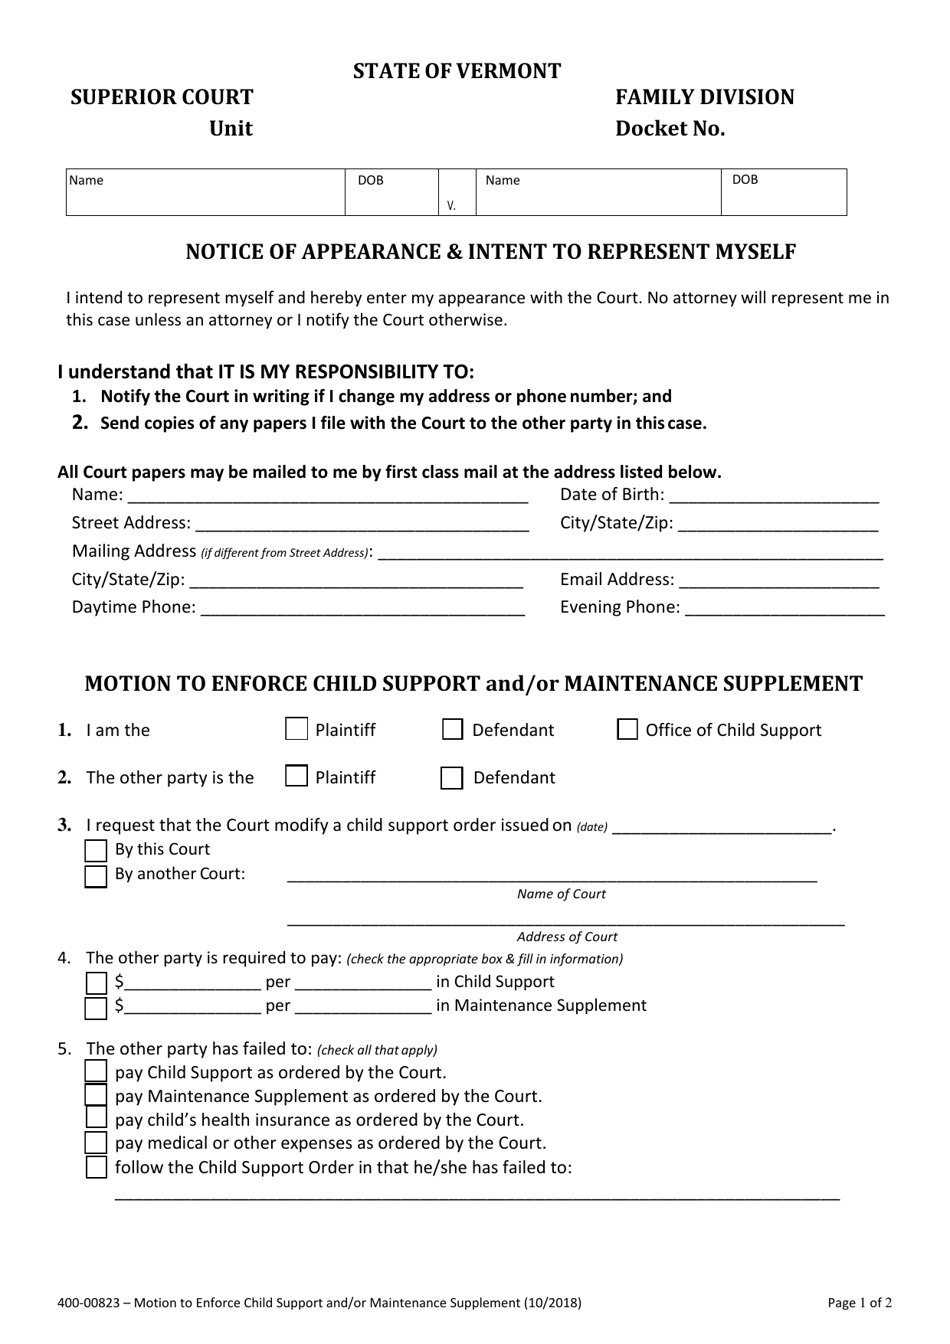 Form 400-00823 Motion to Enforce Child Support and / or Maintenance Supplement - Vermont, Page 1